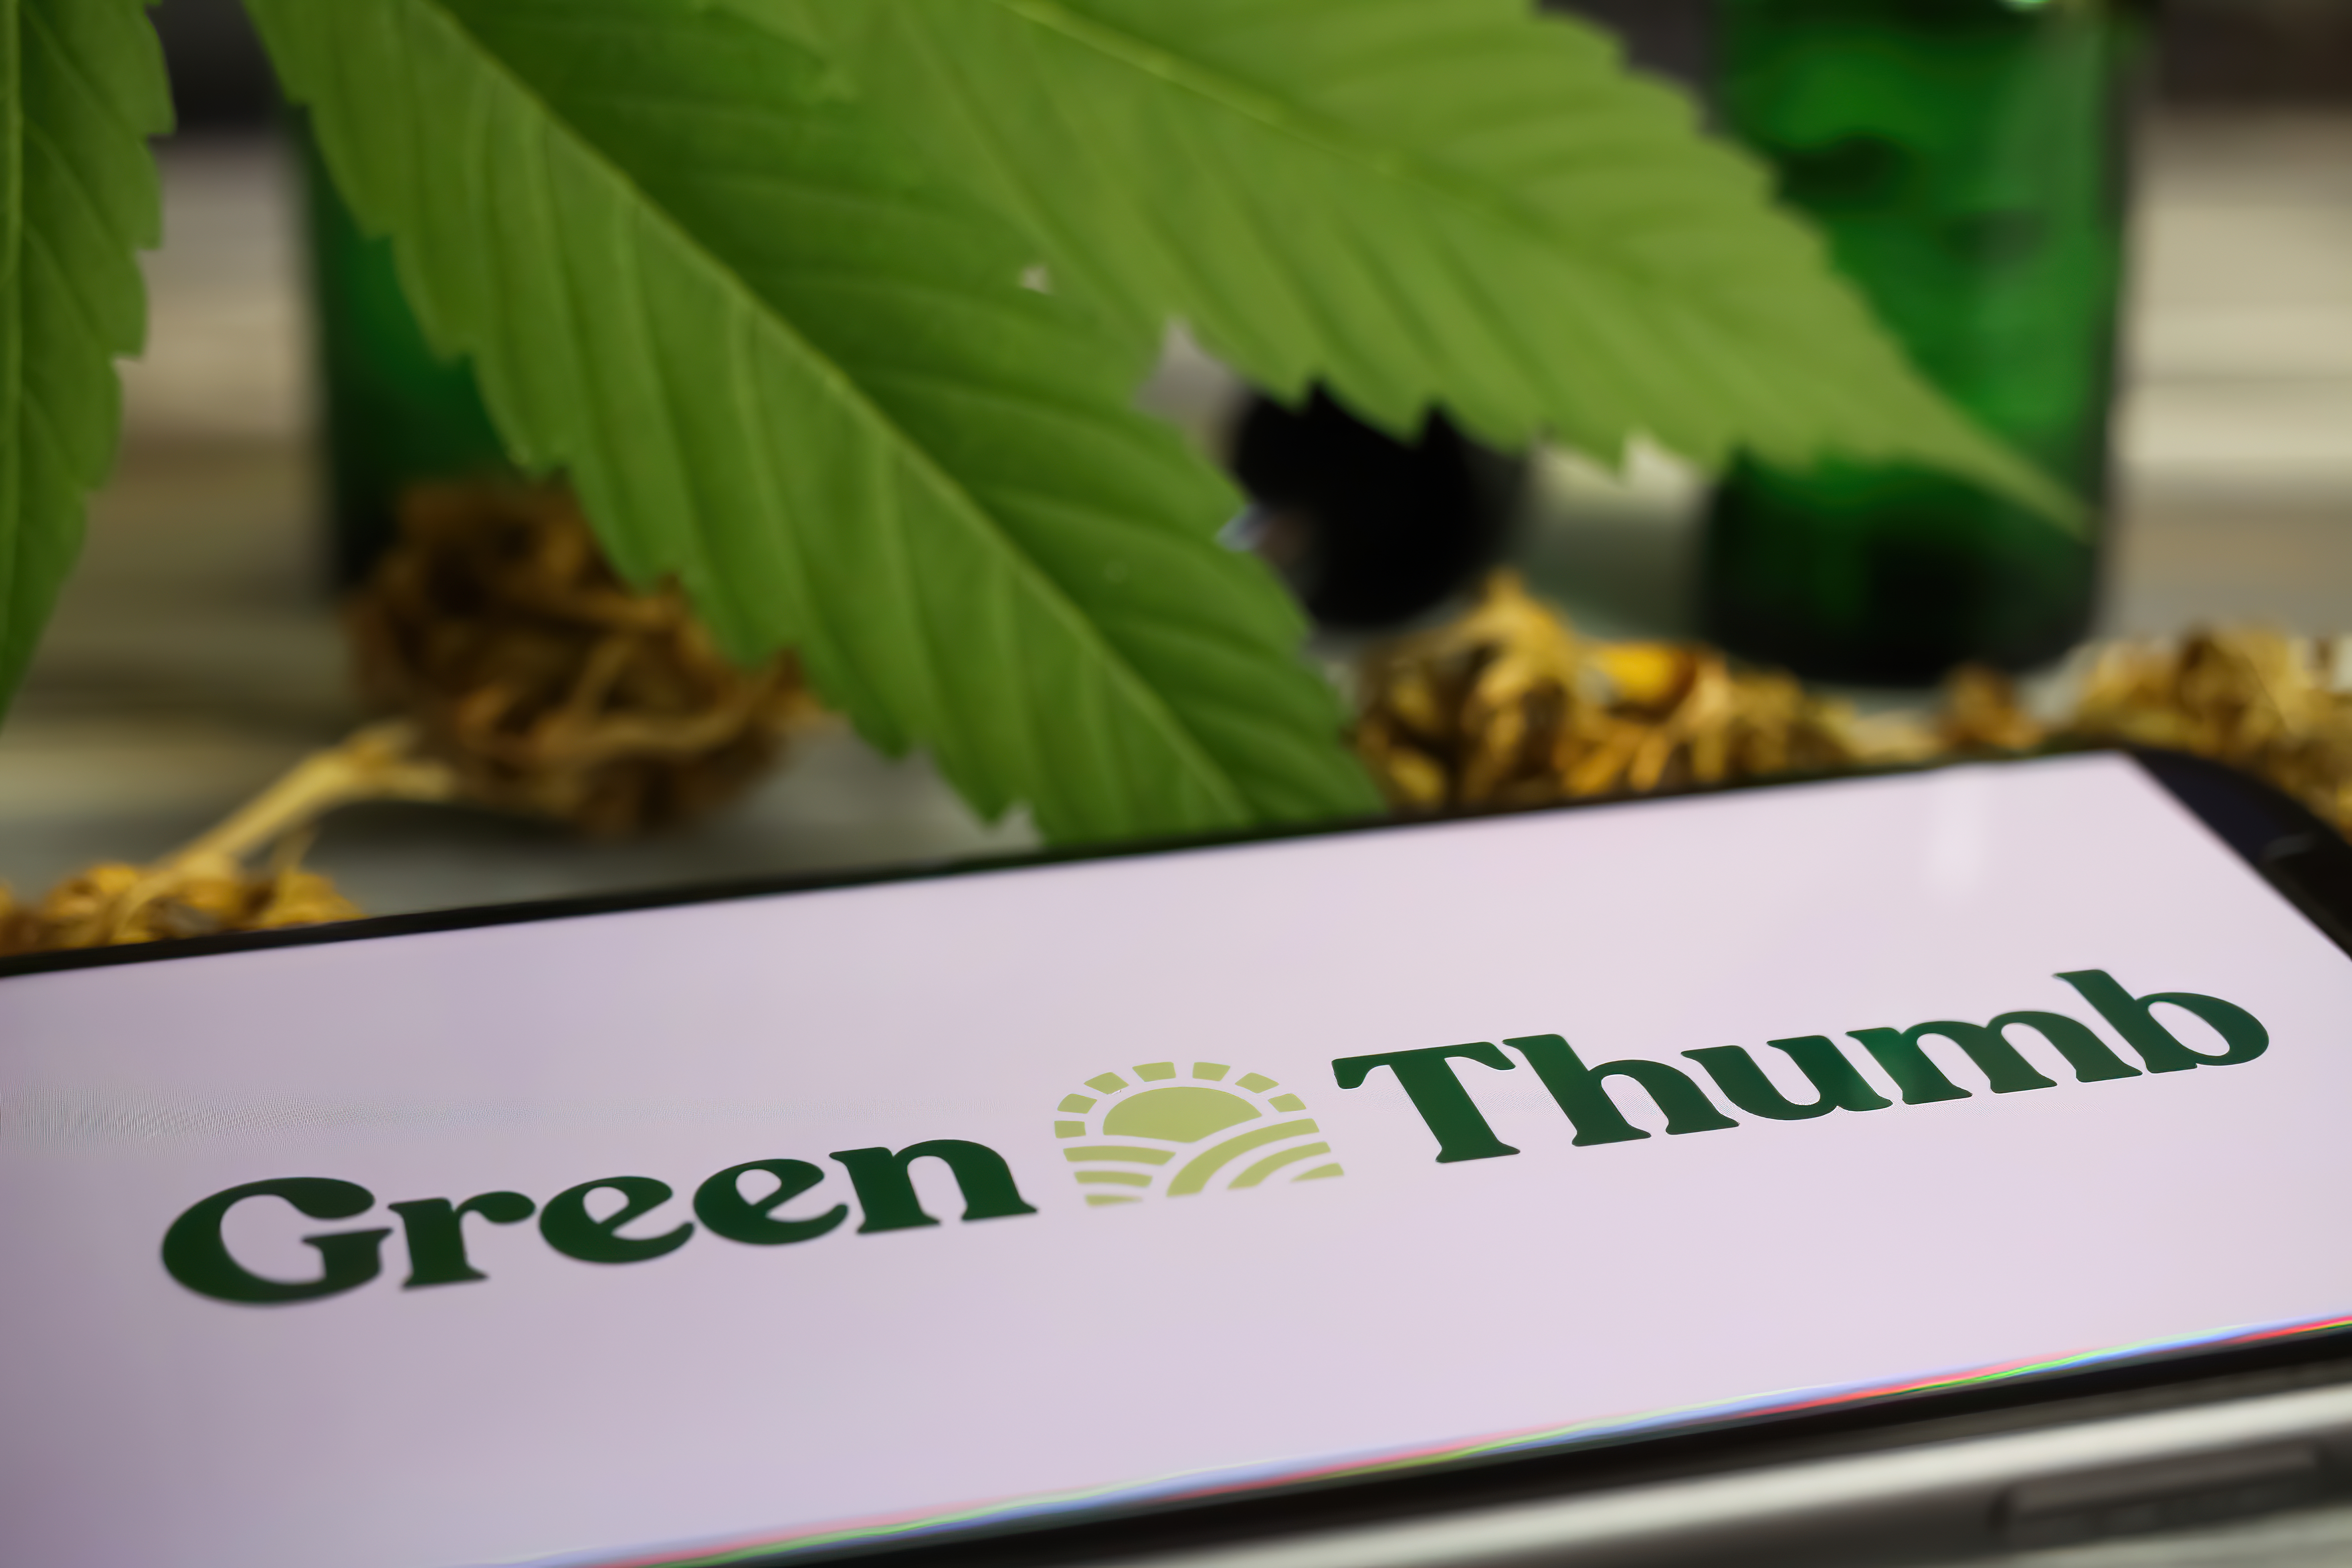 A mobile device displays the Green Thumb logo in from of a plant